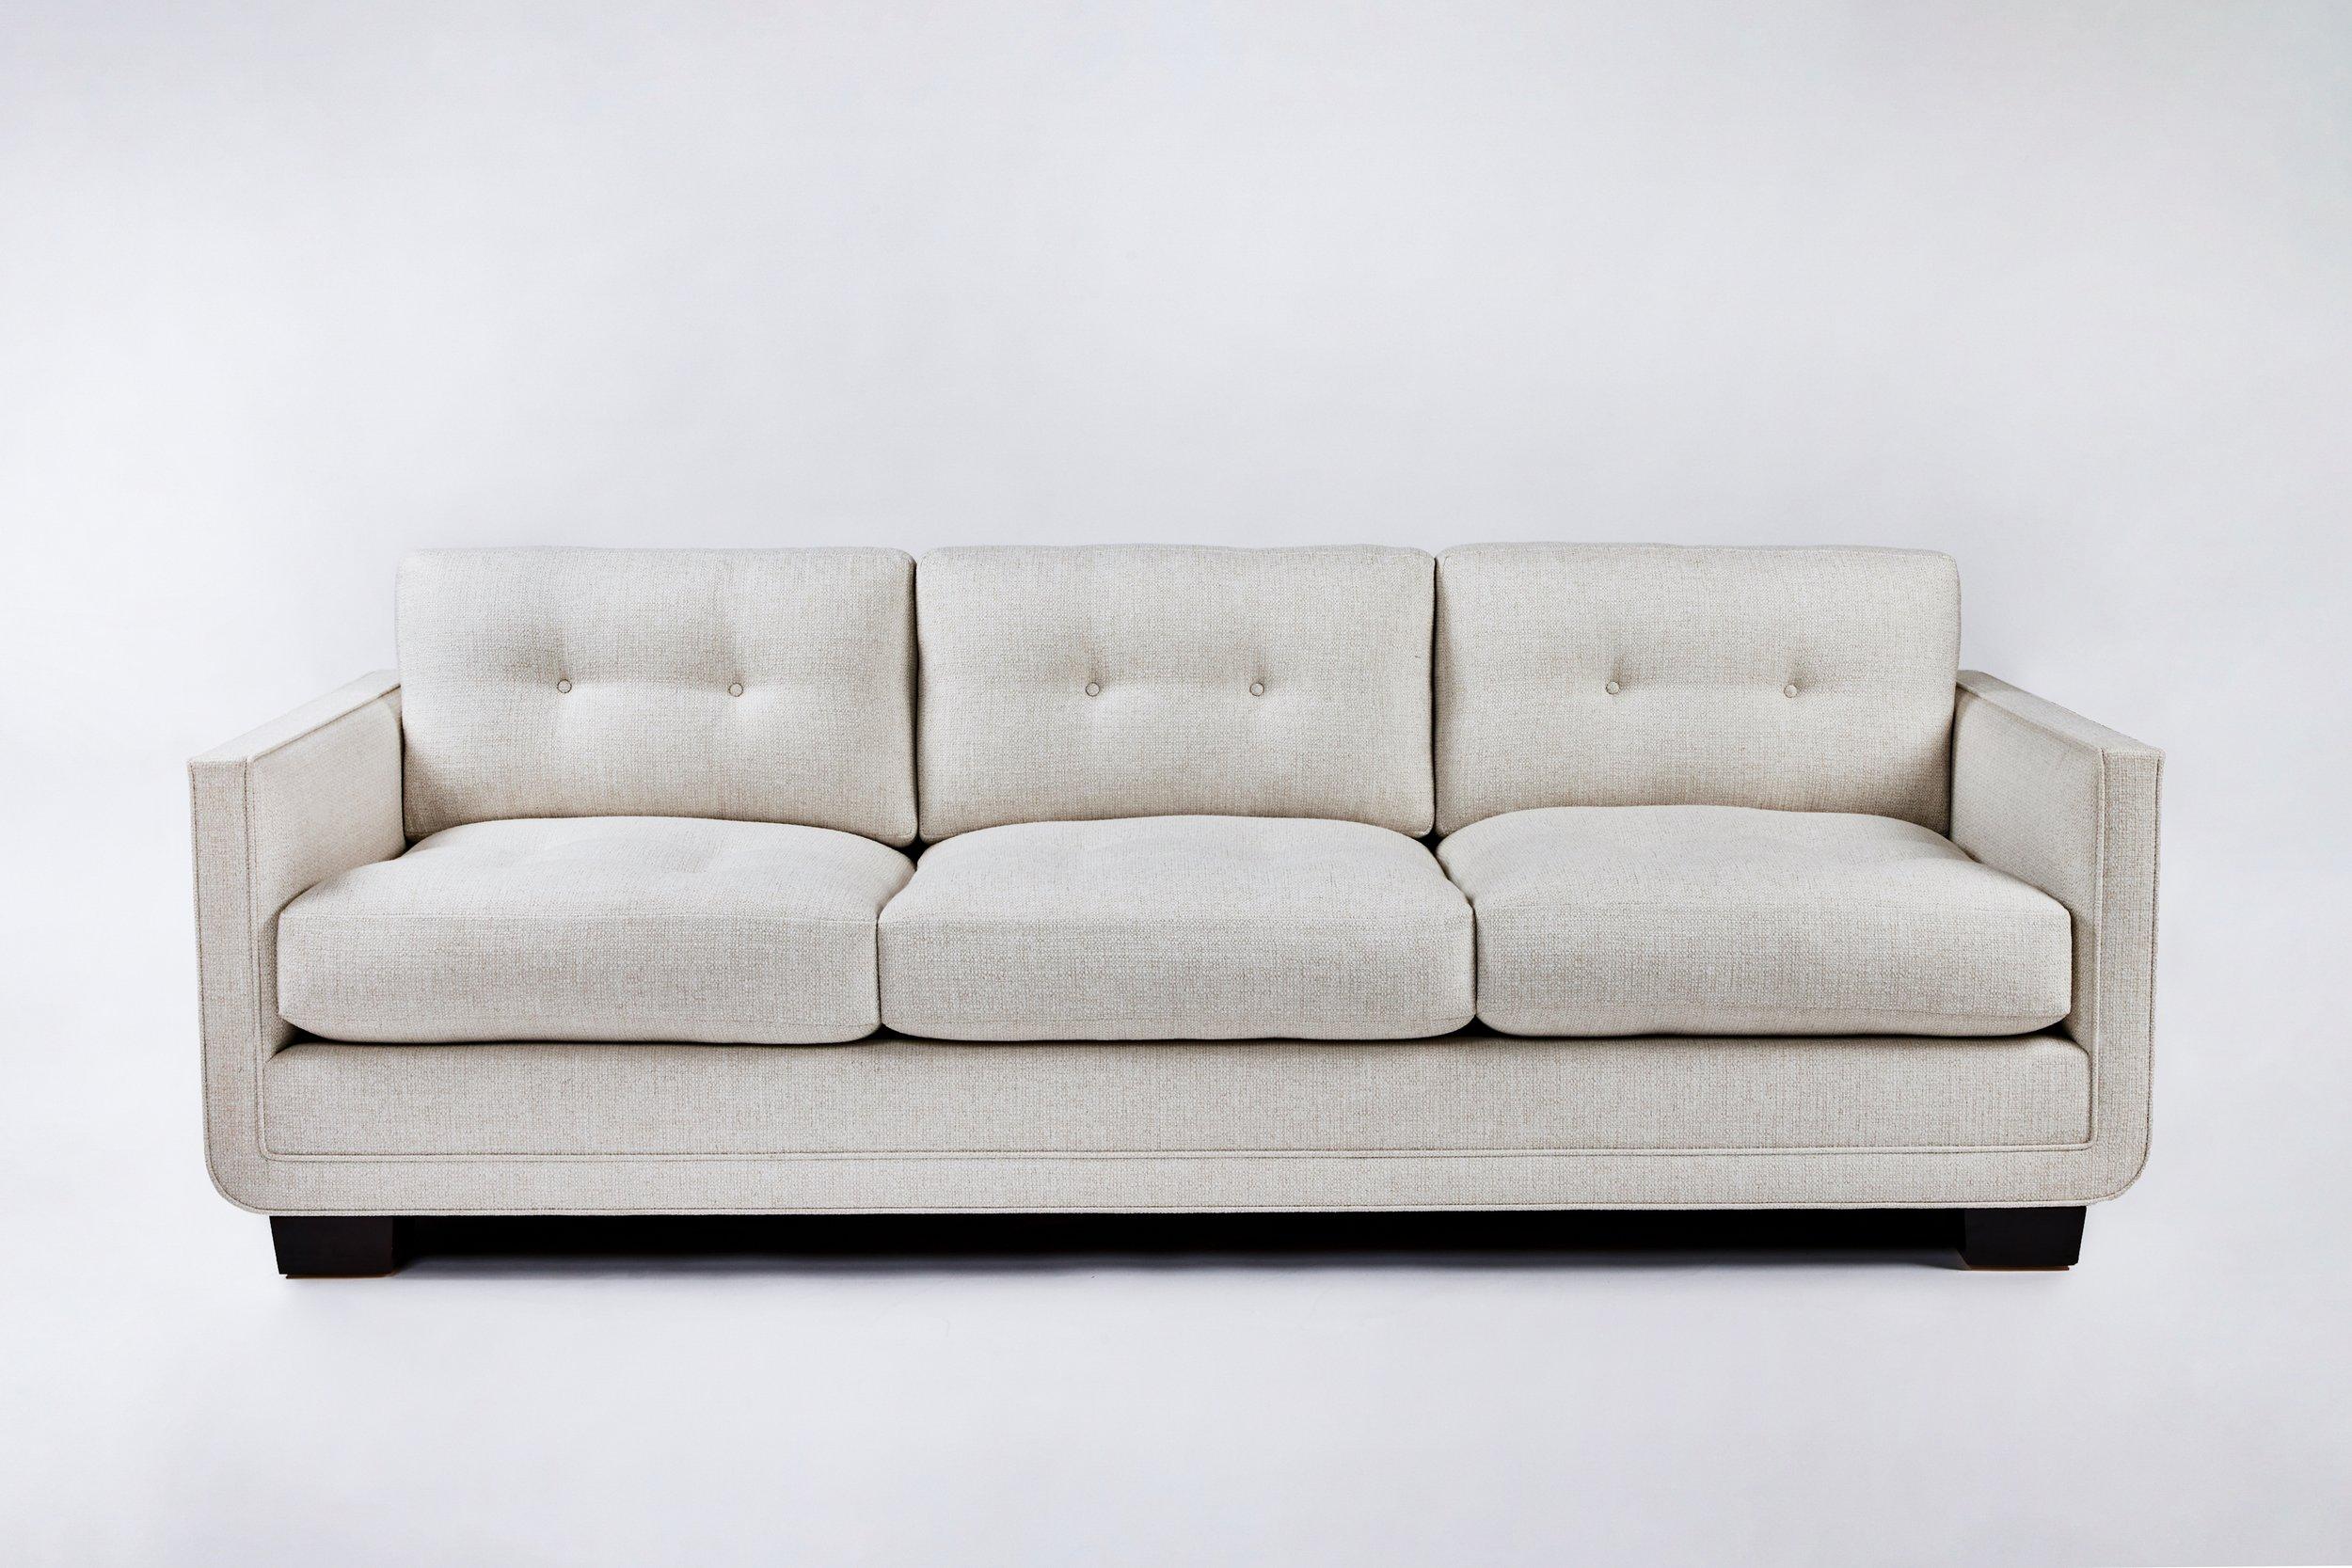 Martin & Brockett's Harrison Tufted Sofa 84” consists of a streamlined frame that curves at the base to hold a deep but tidy (3 over 3) mix of loose tufted back and seat cushions.

Available for order in custom sizing.

Sold as C.O.M. only. - 18